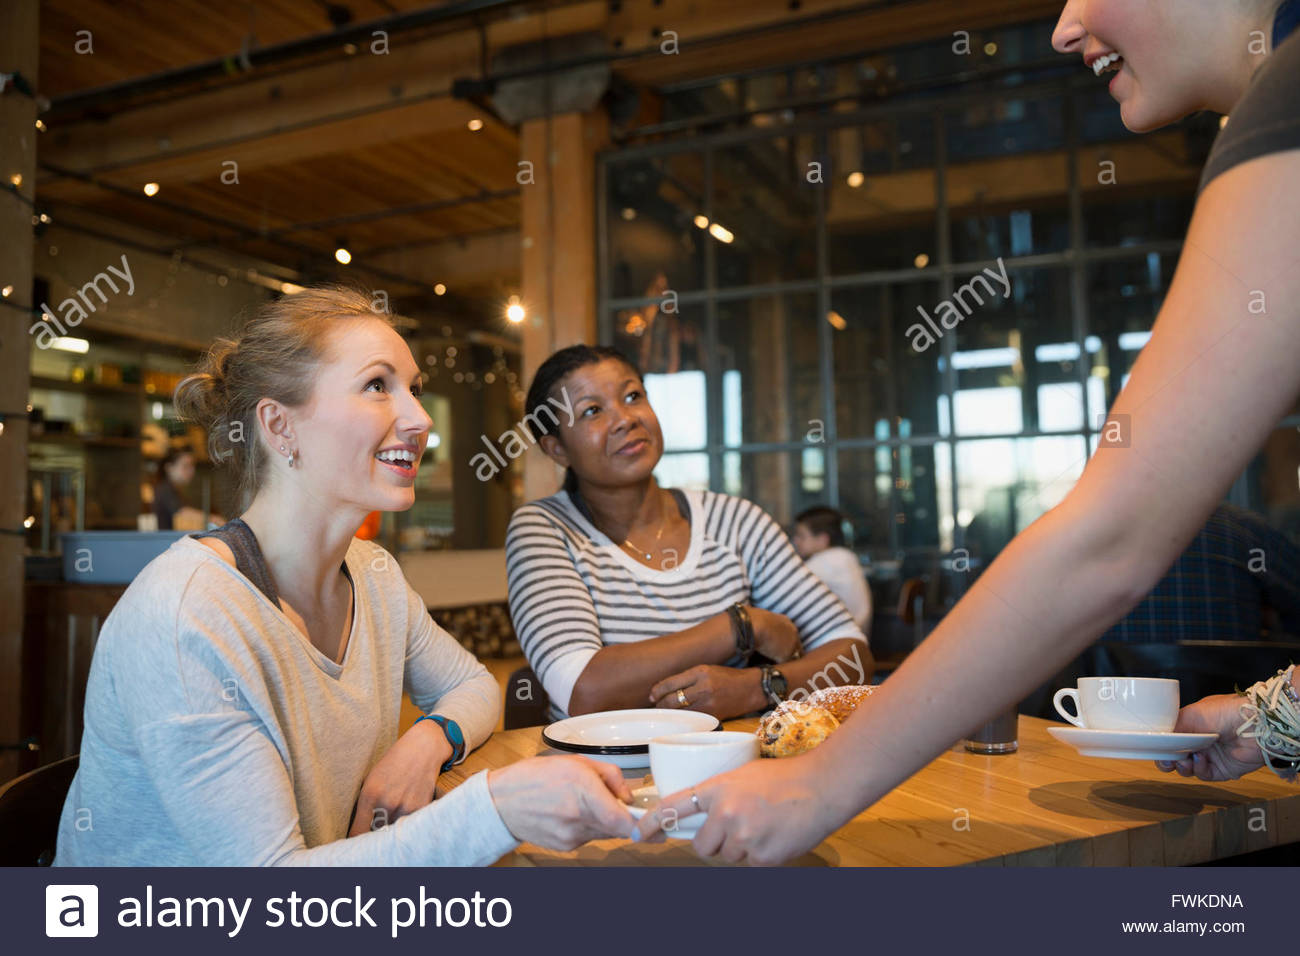 Bakery worker serving coffee to customers Stock Photo